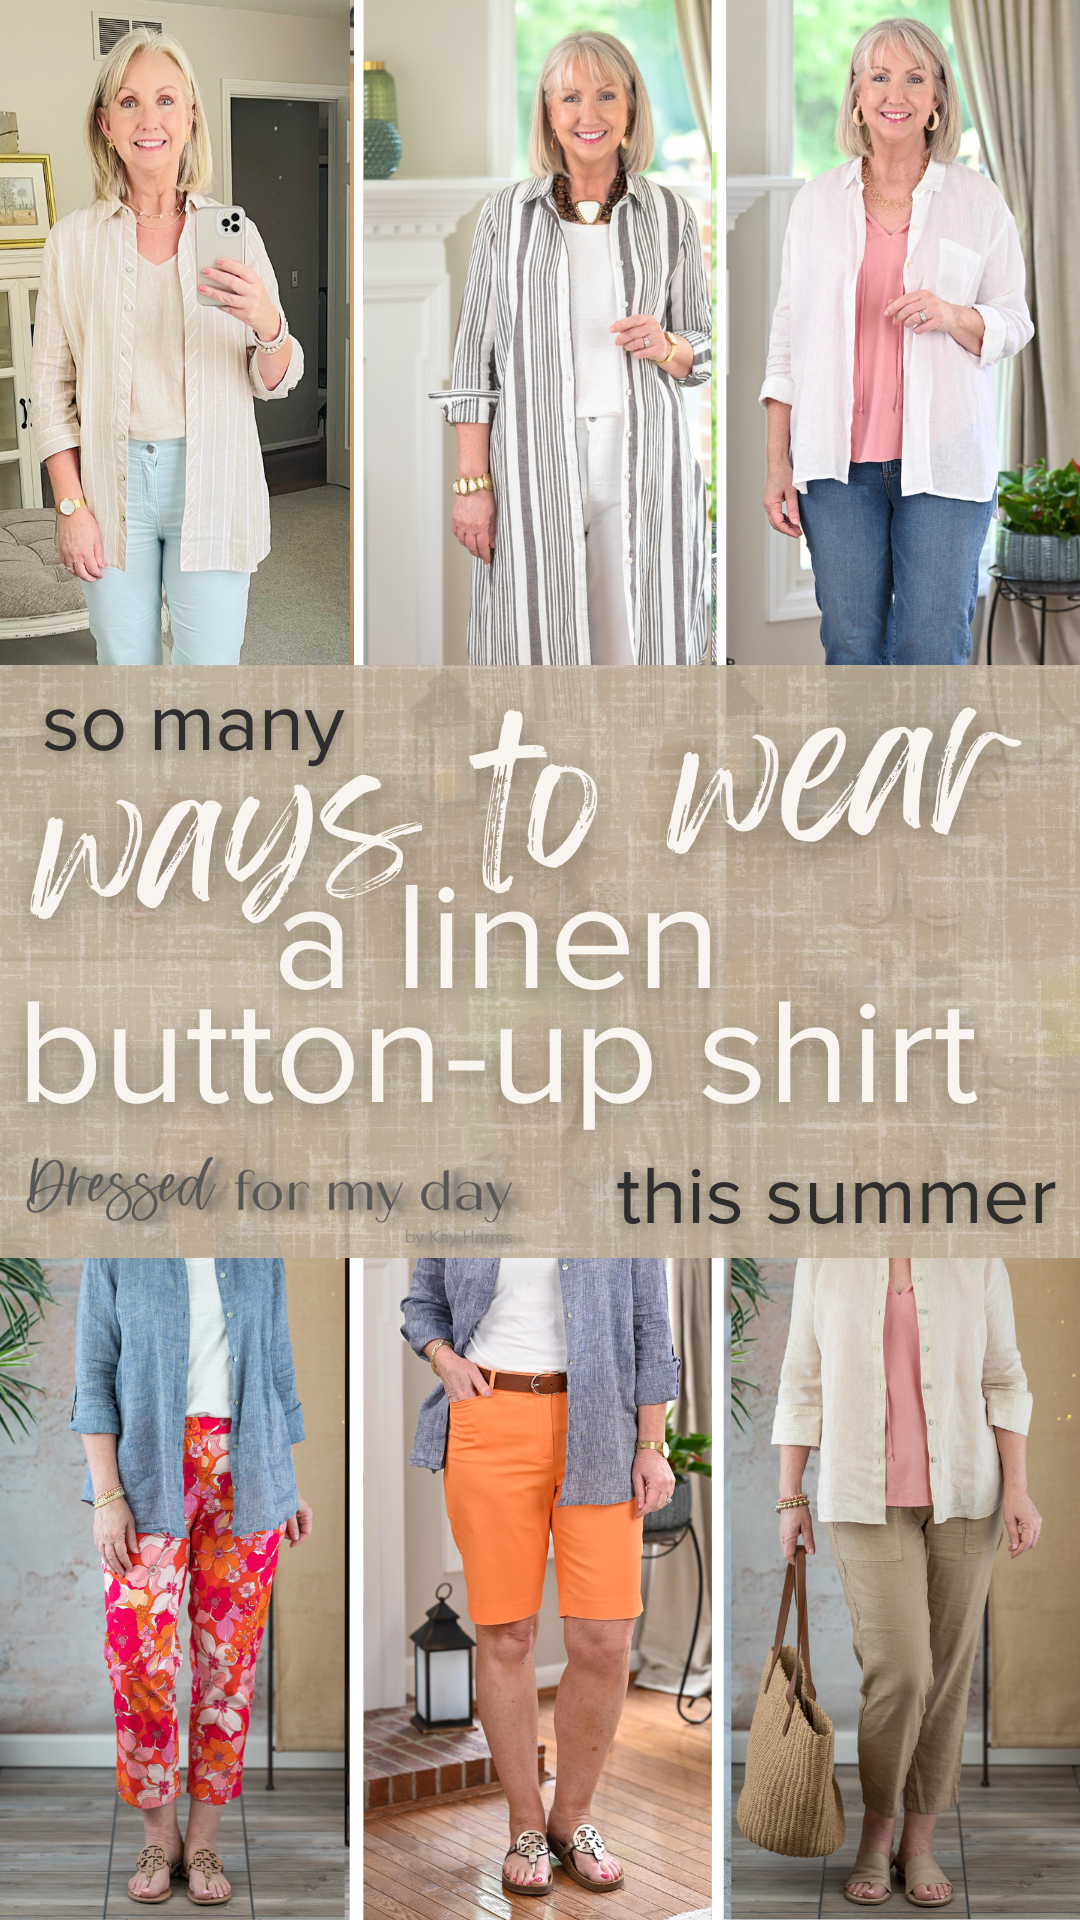 So Many Ways to Wear a Linen Button-Up Shirt this Summer